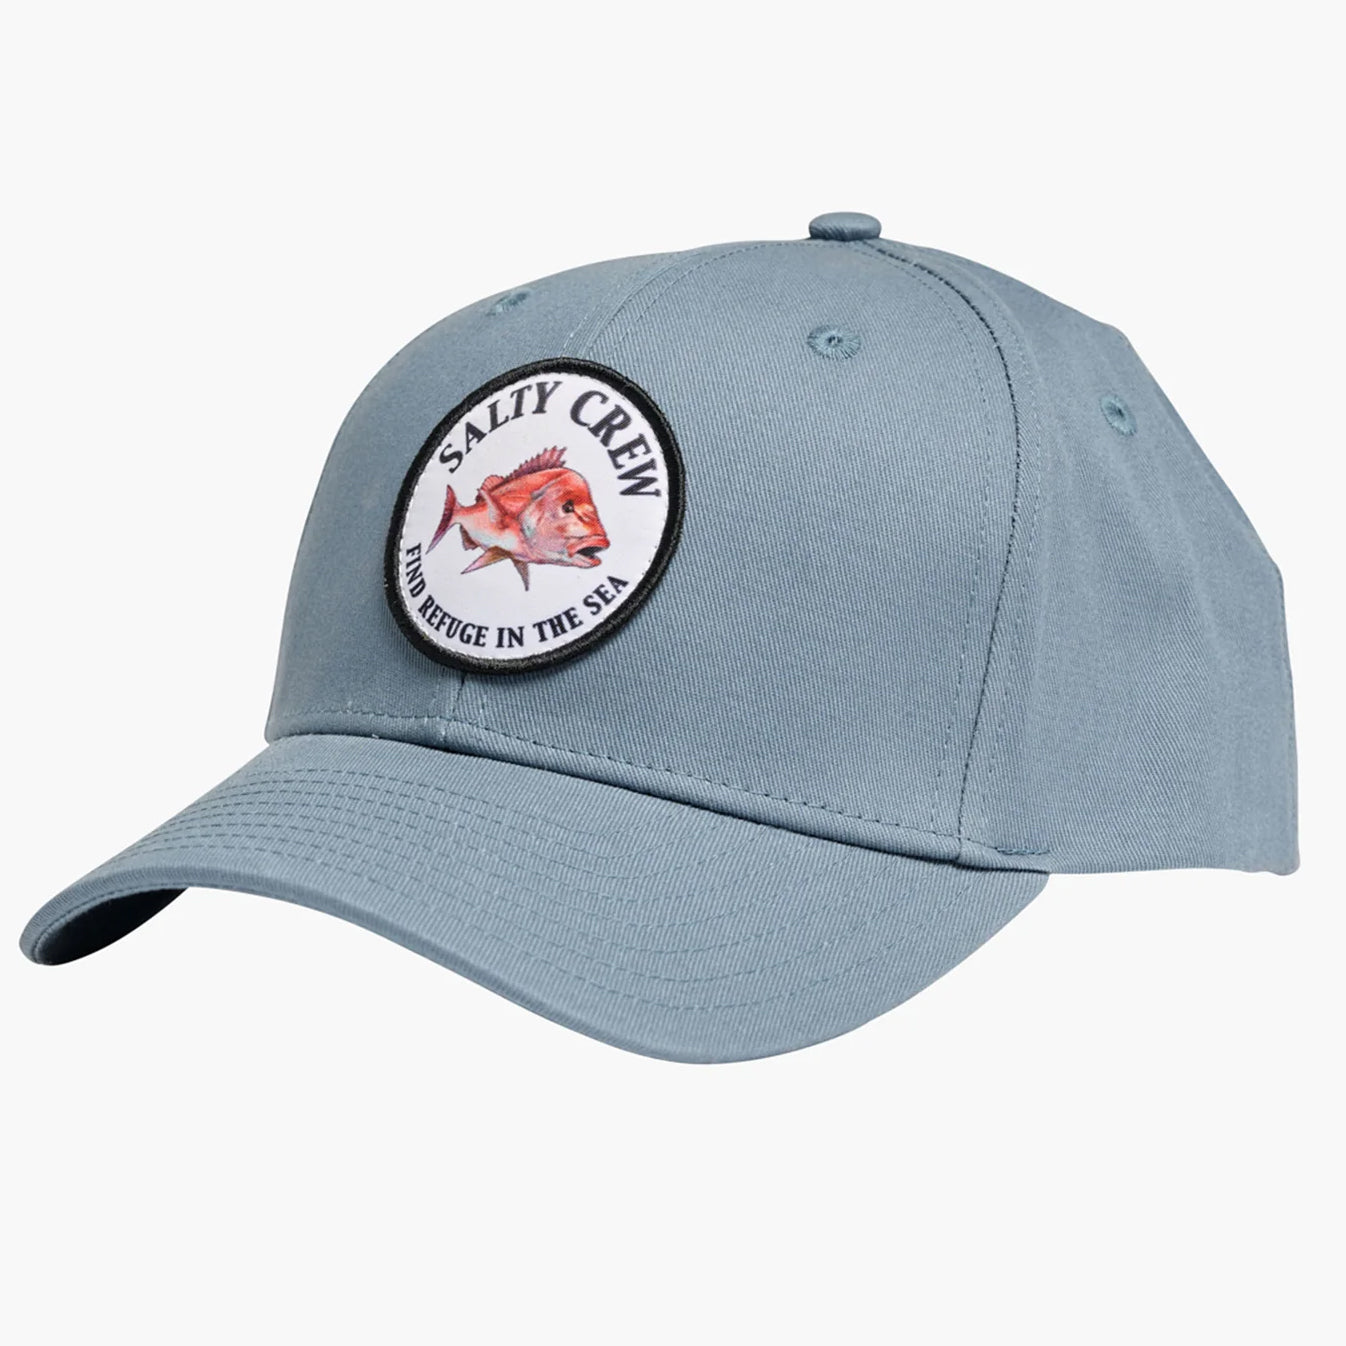 Salty Crew Snap Attack 6 Panel Cap Front